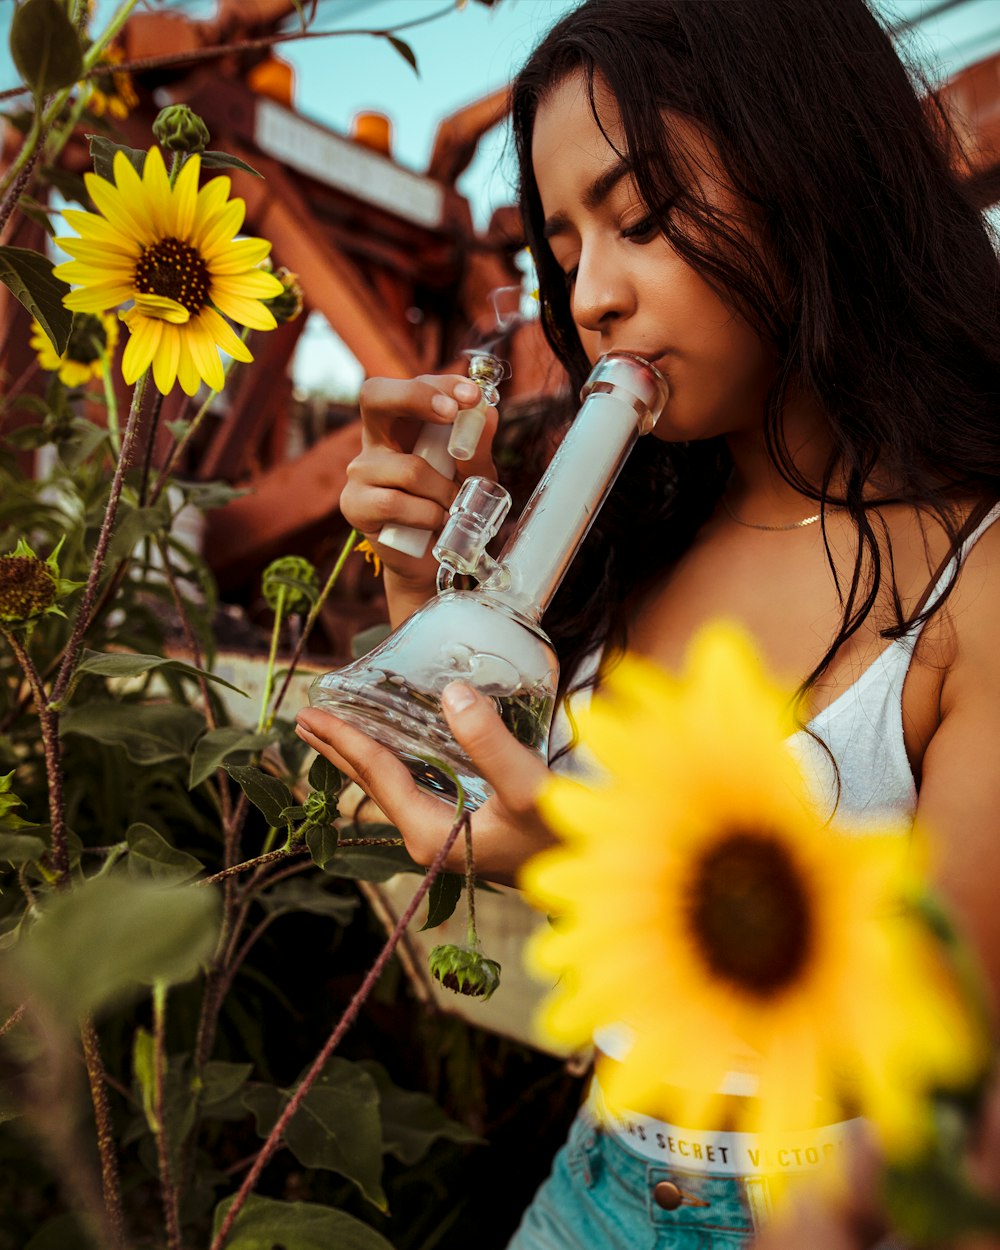 woman huffing from a glass bong